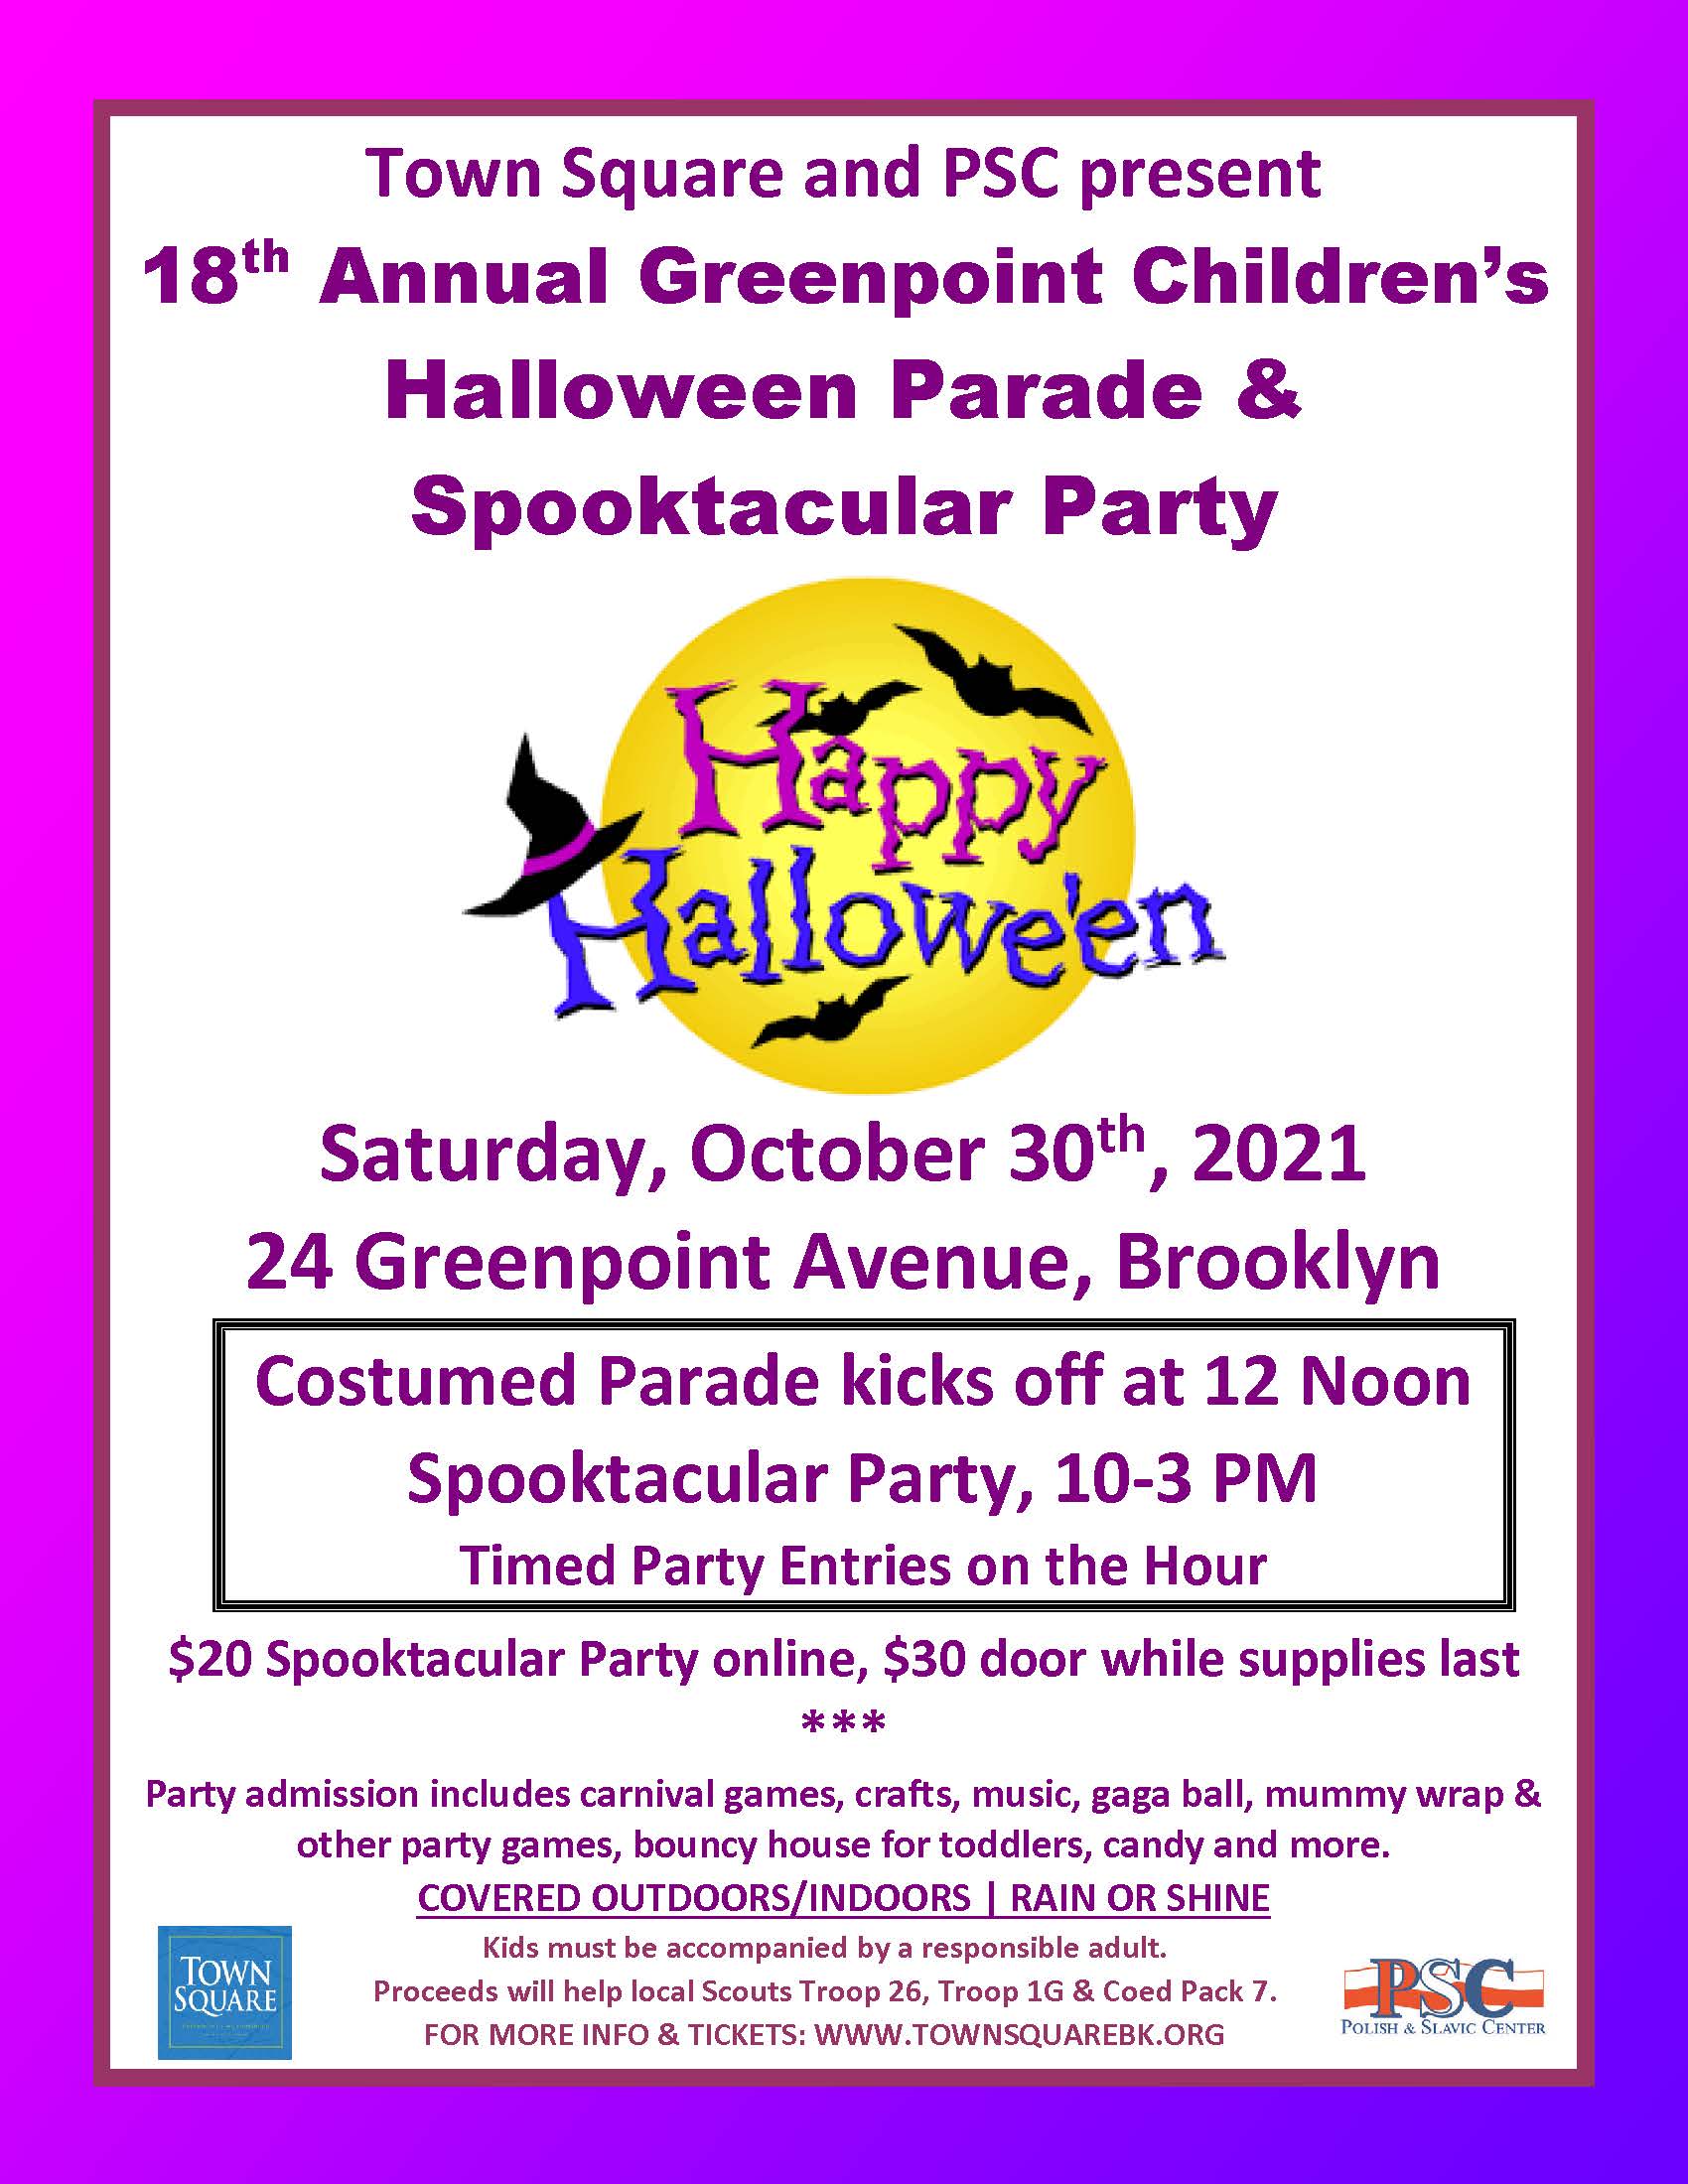 Greenpoint Children's Halloween Parade and Spooktacular Party Go